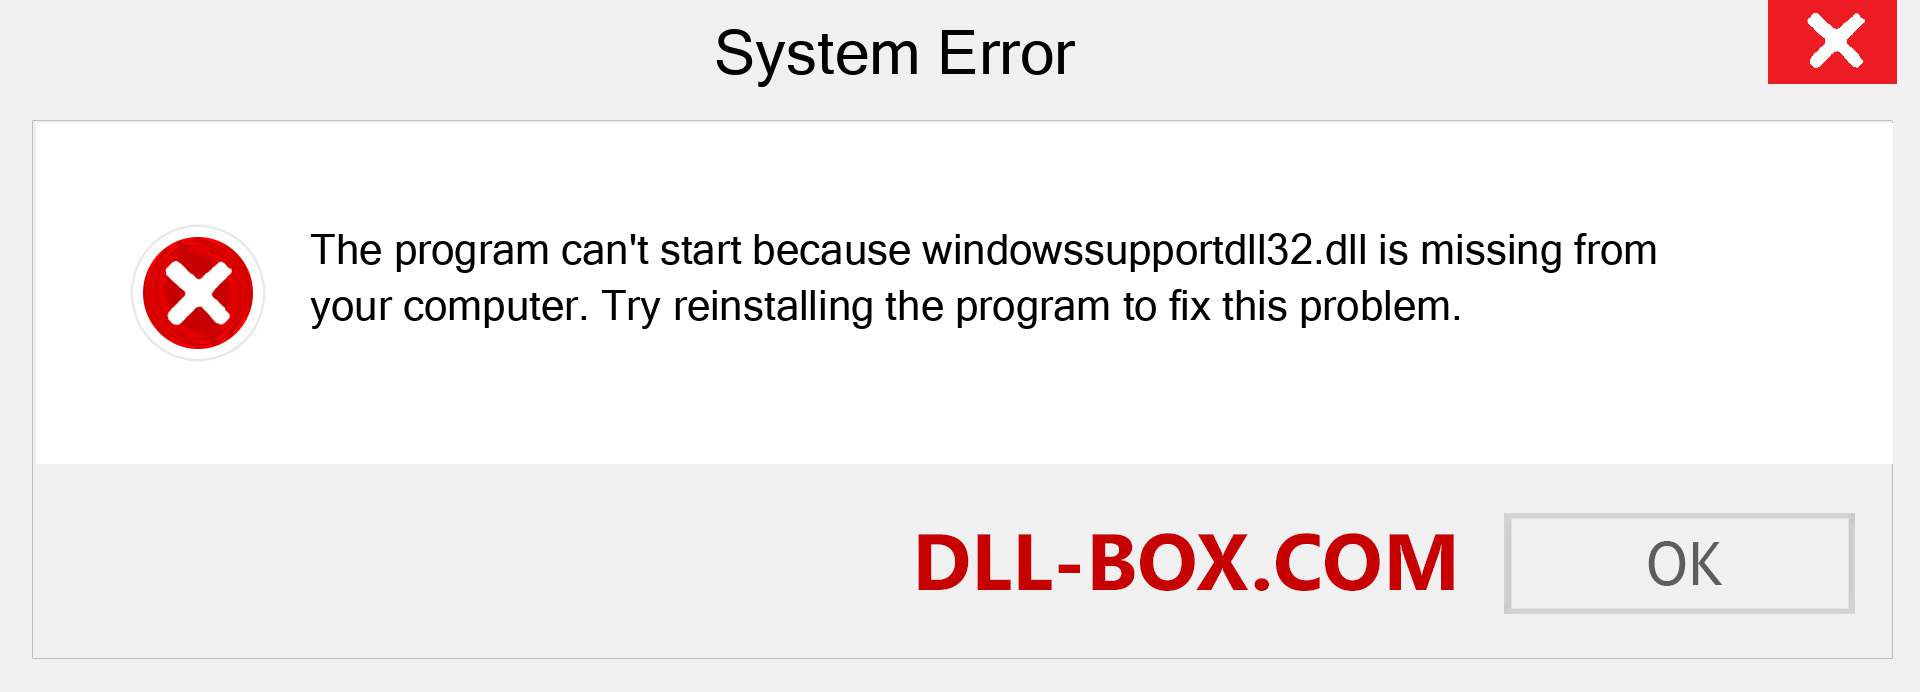  windowssupportdll32.dll file is missing?. Download for Windows 7, 8, 10 - Fix  windowssupportdll32 dll Missing Error on Windows, photos, images